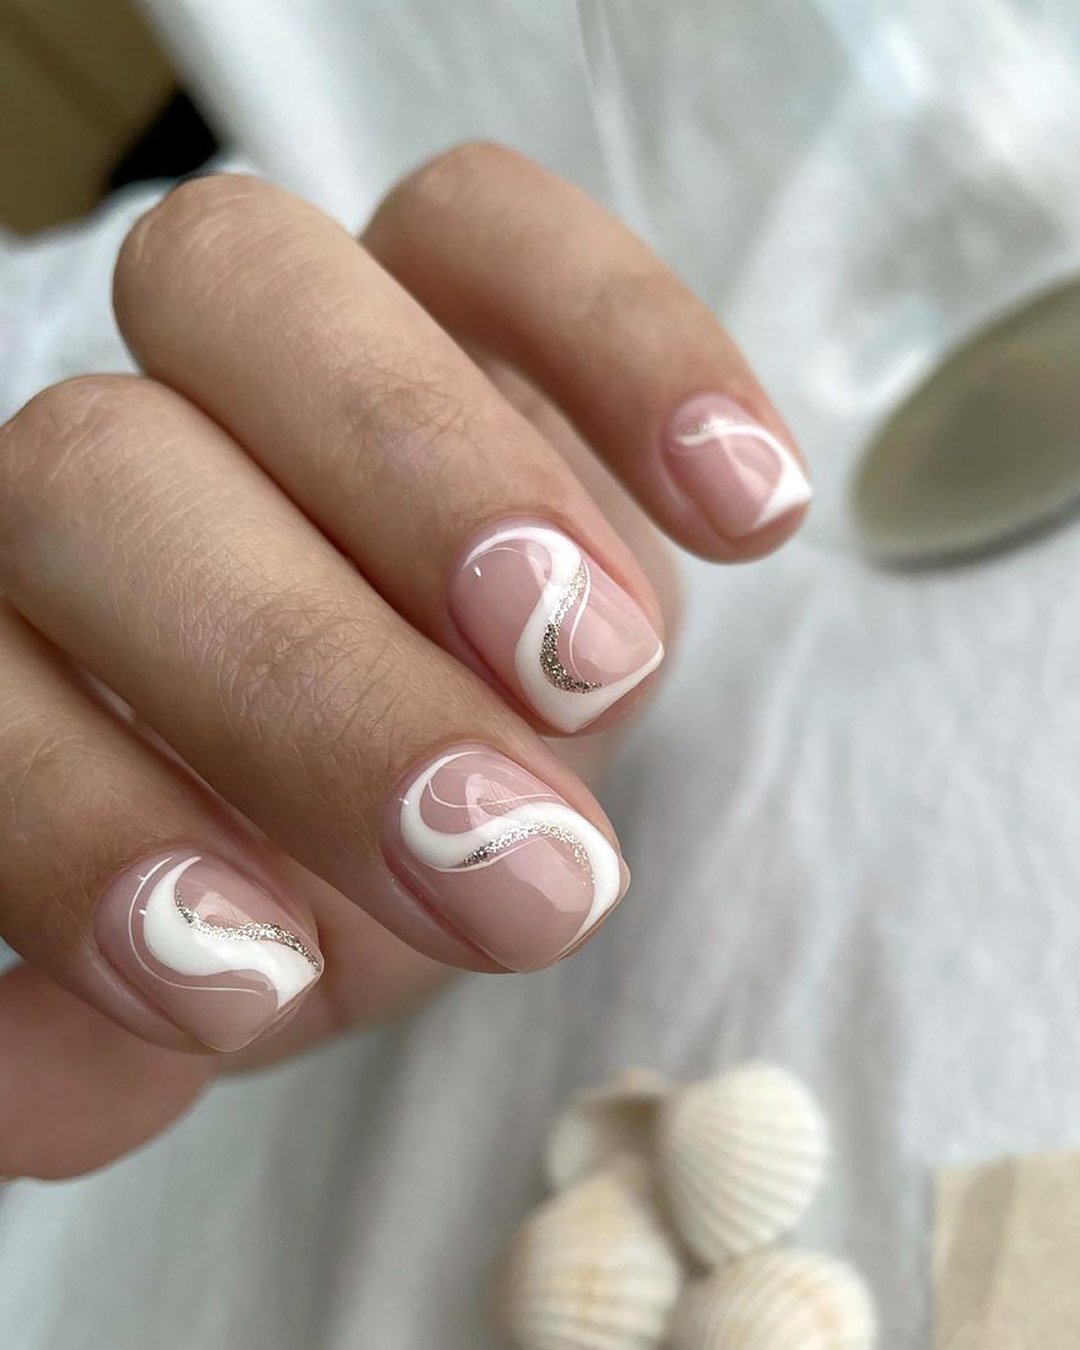 pink and white nails wedding stripes and gold glitter kangannynails